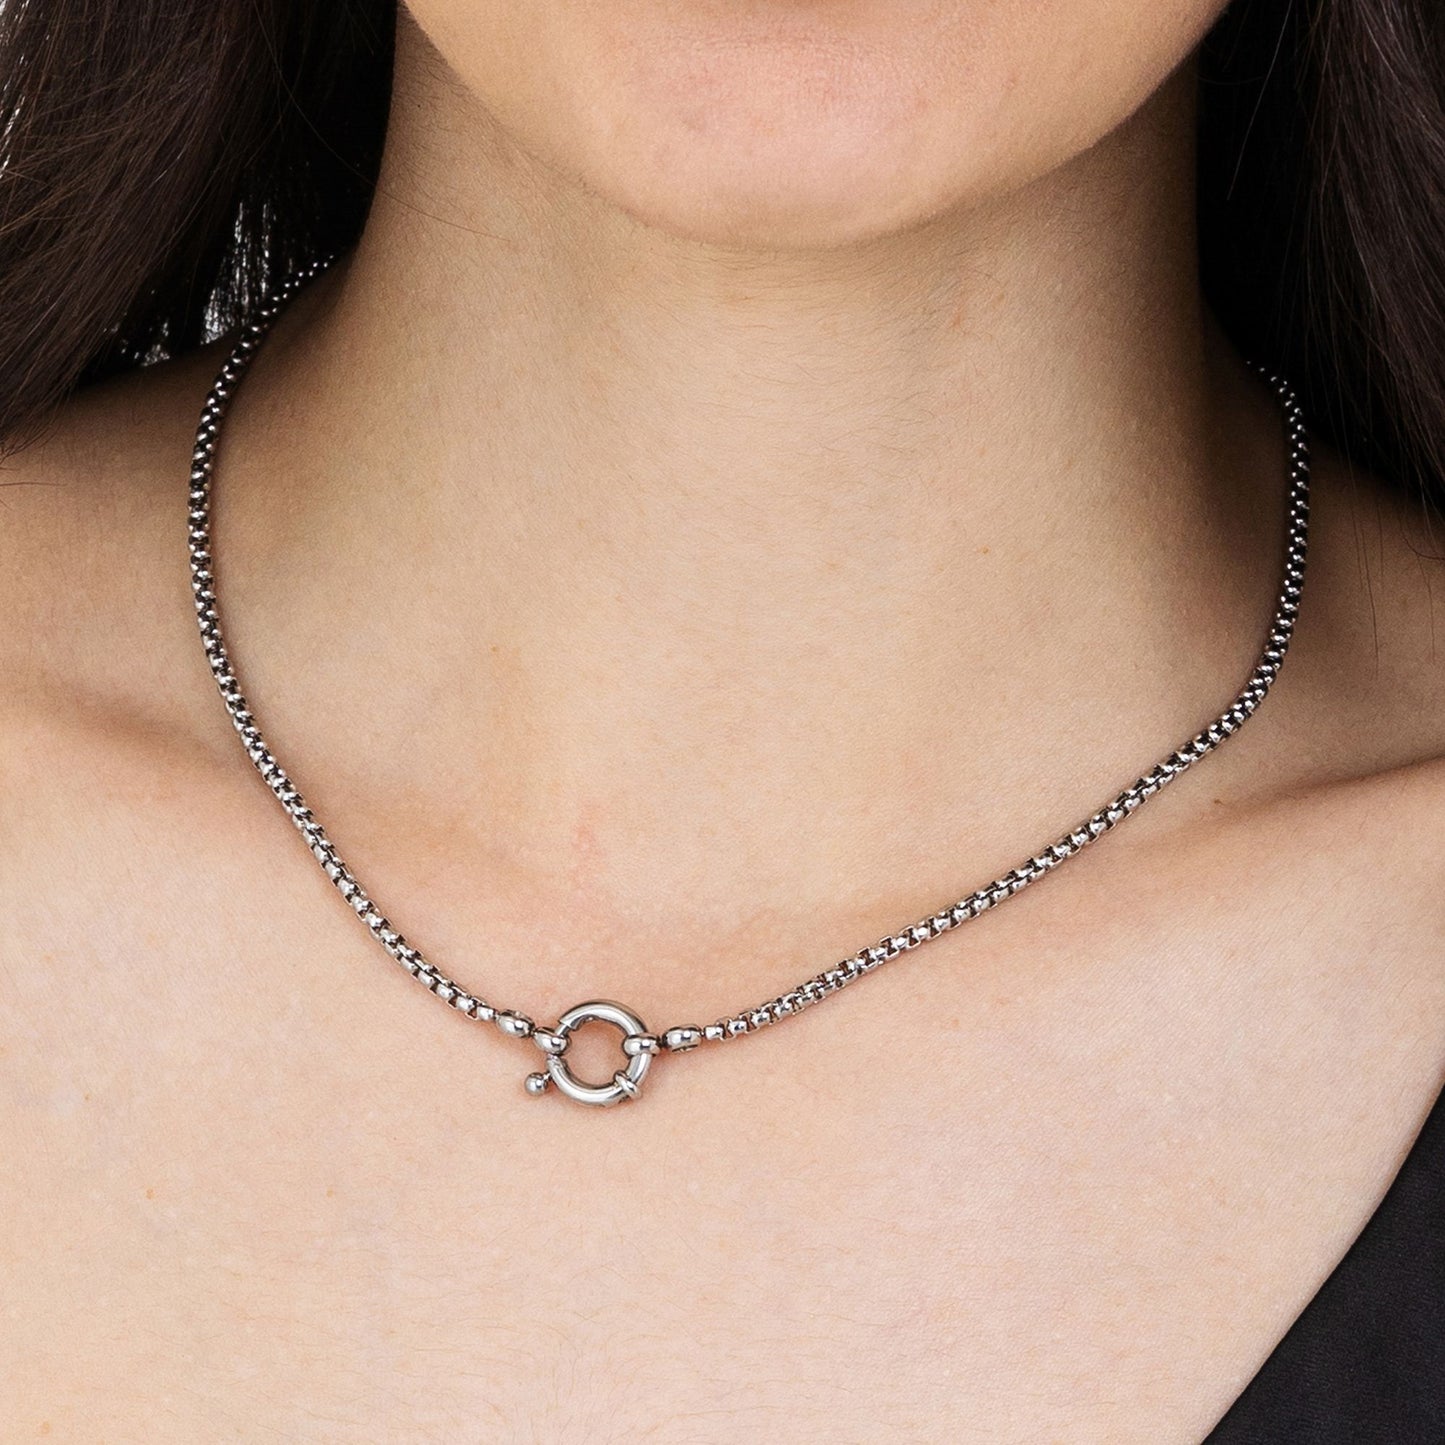 WOMAN'S NECKLACE IN STEEL WITH MOSCHET Luca Barra